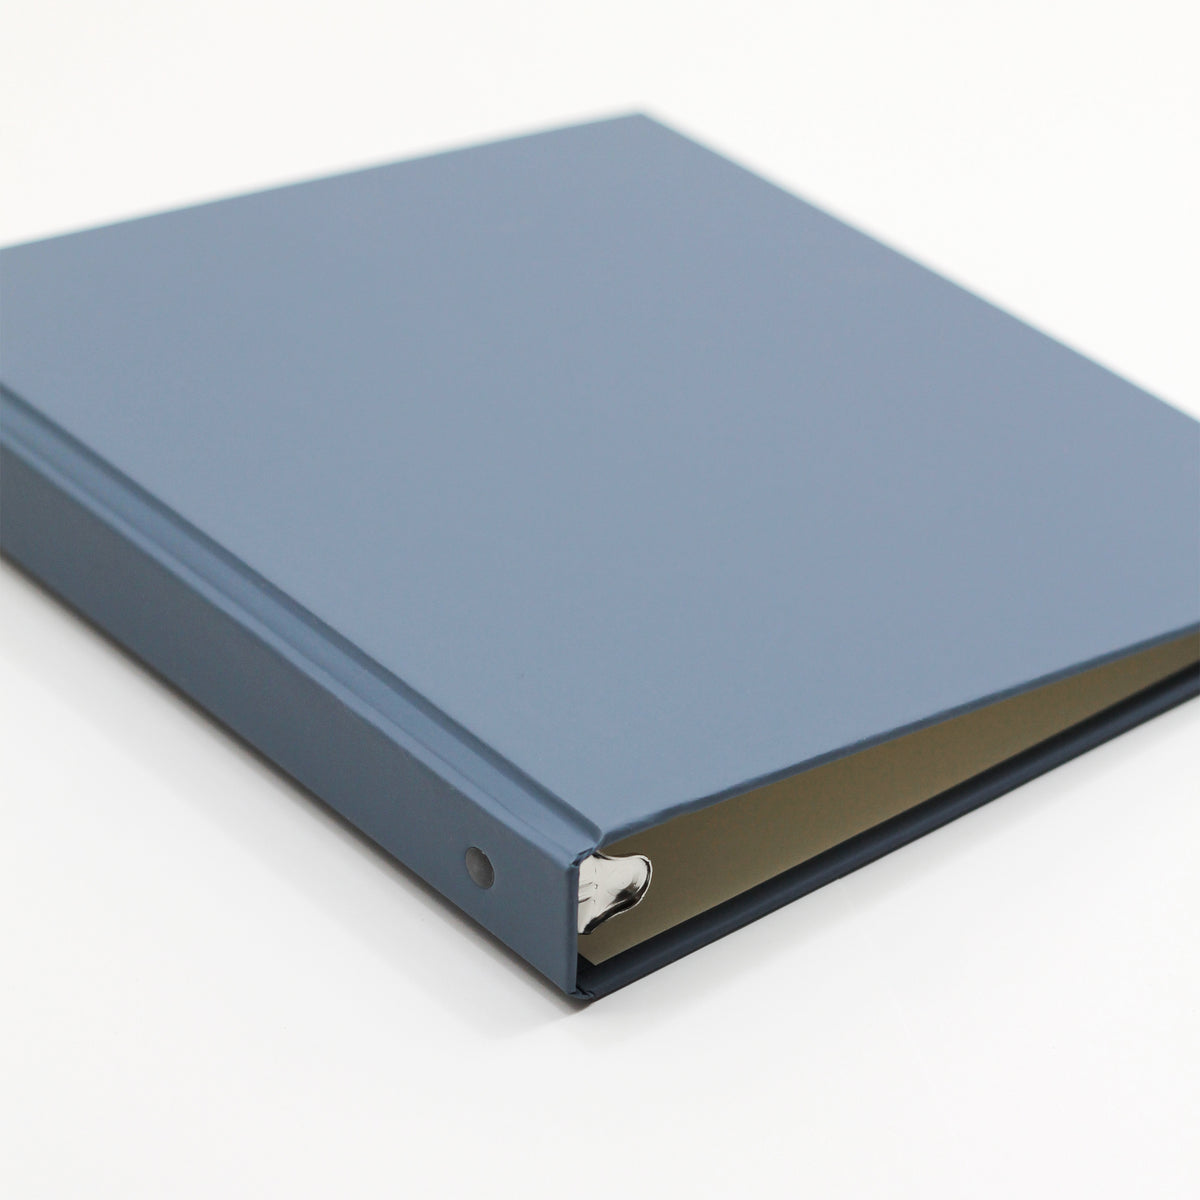 Large Photo Binder For 8x10 Photos | Cover: Ocean Blue Vegan Leather | Available Personalized